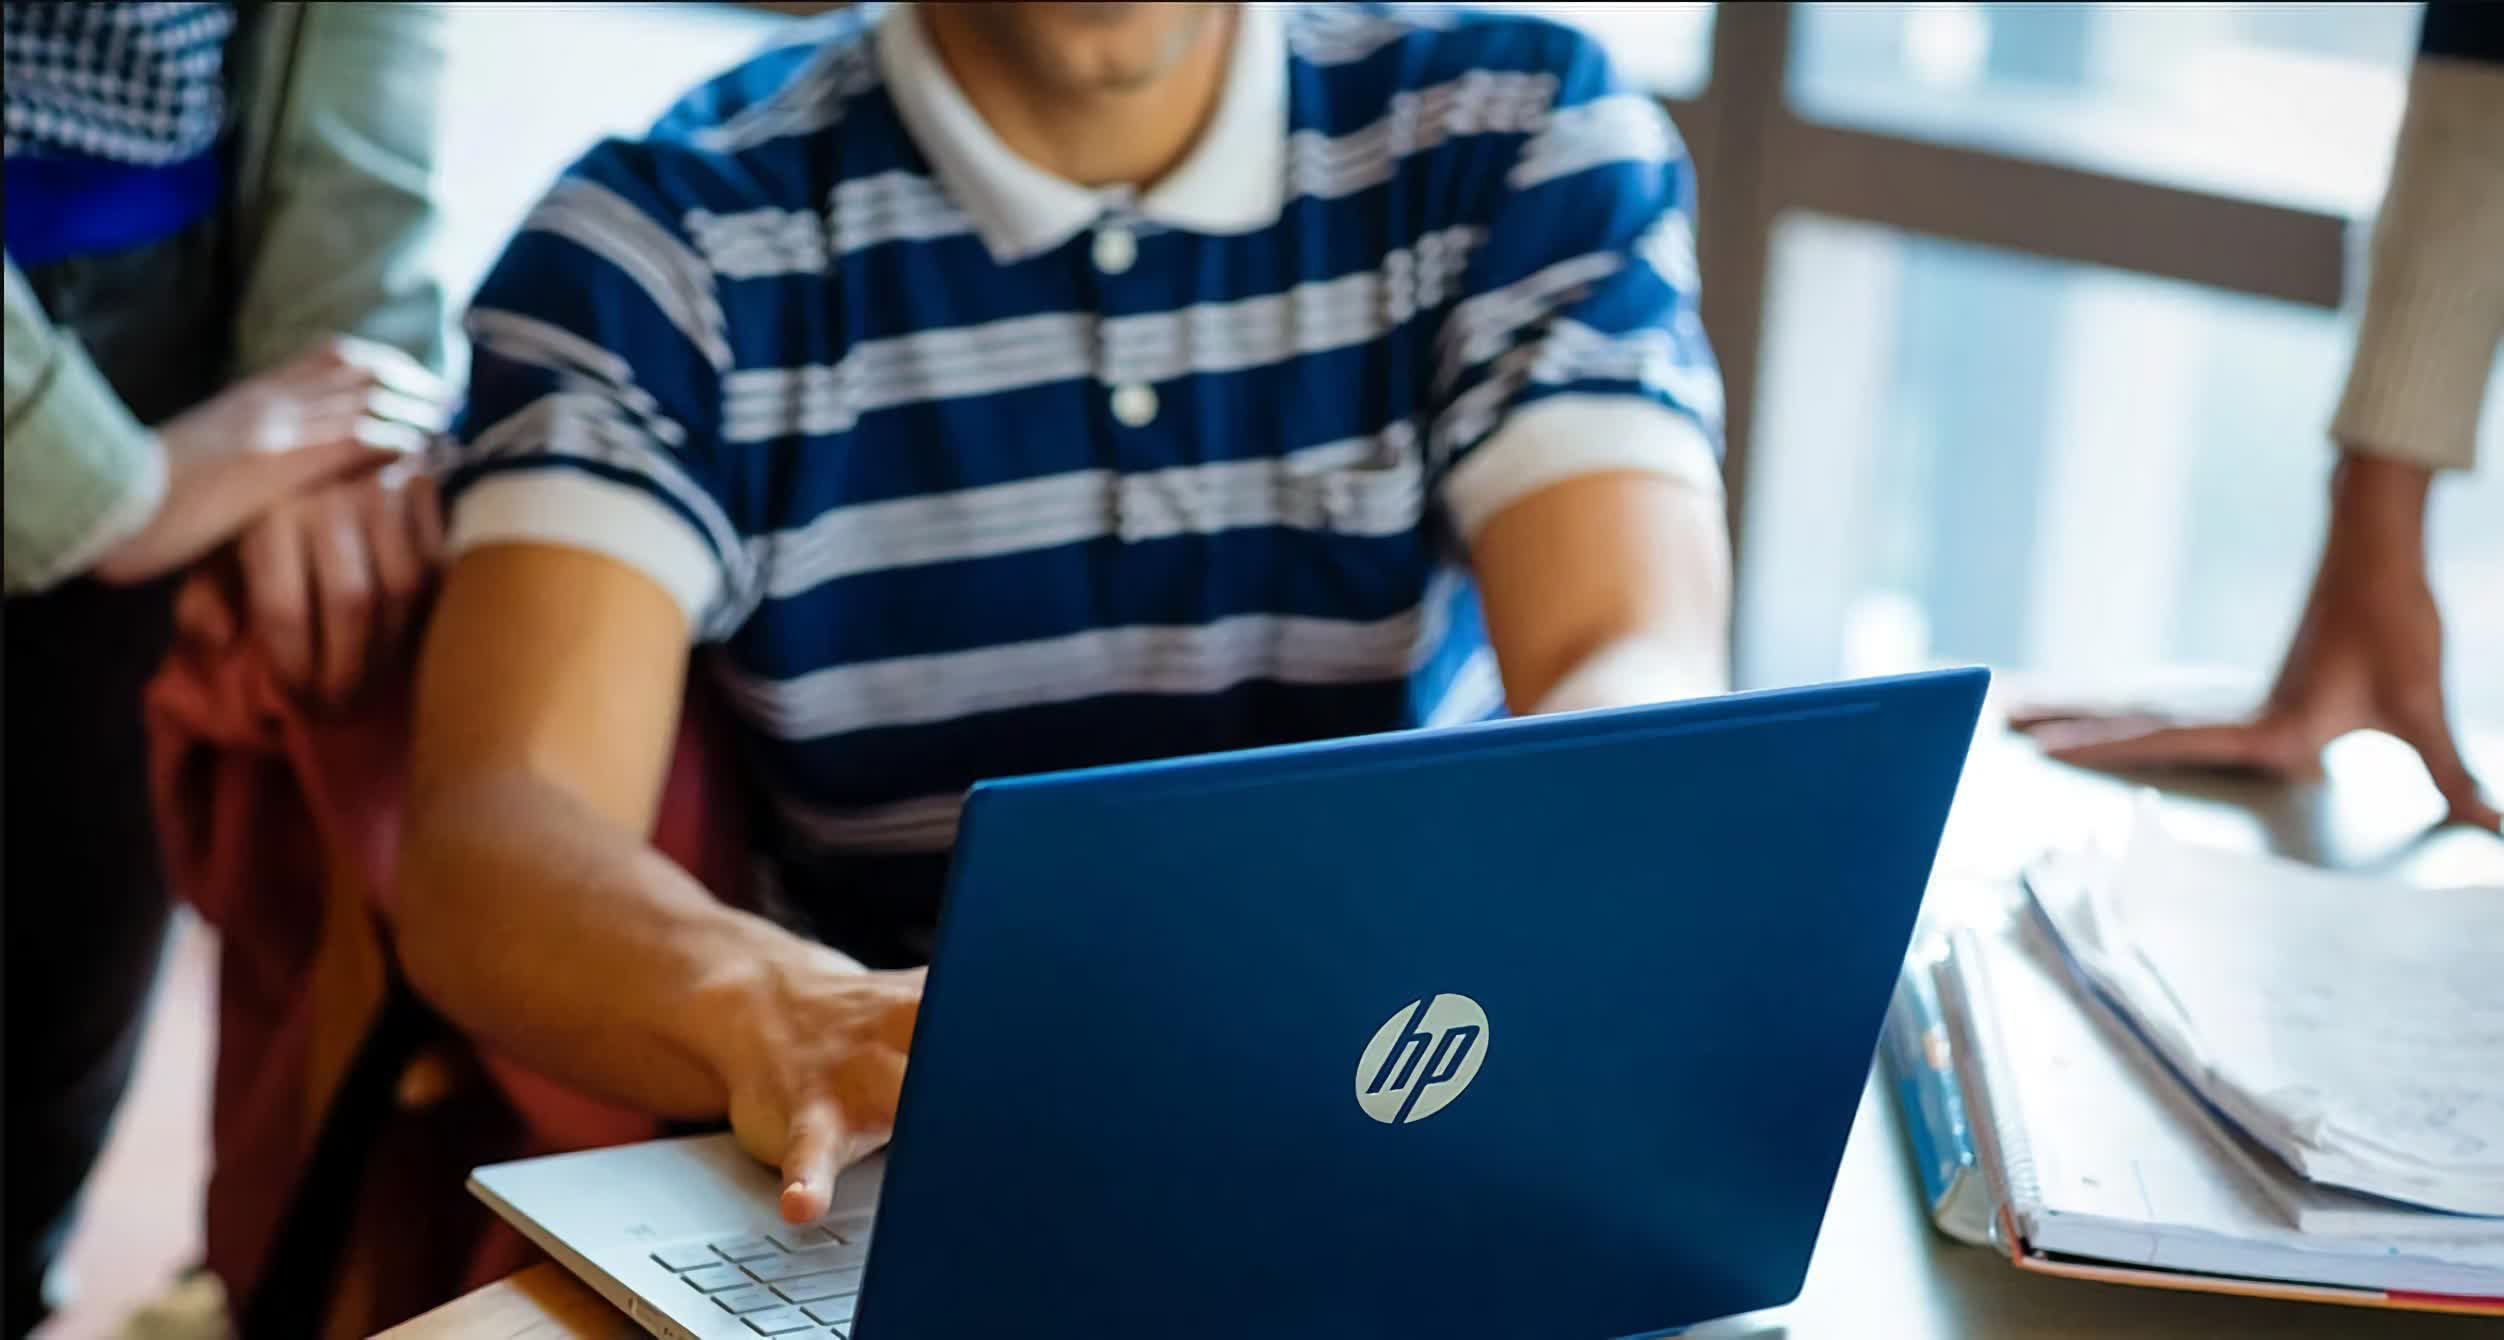 HP will lay off up to 6,000 employees over the next three years